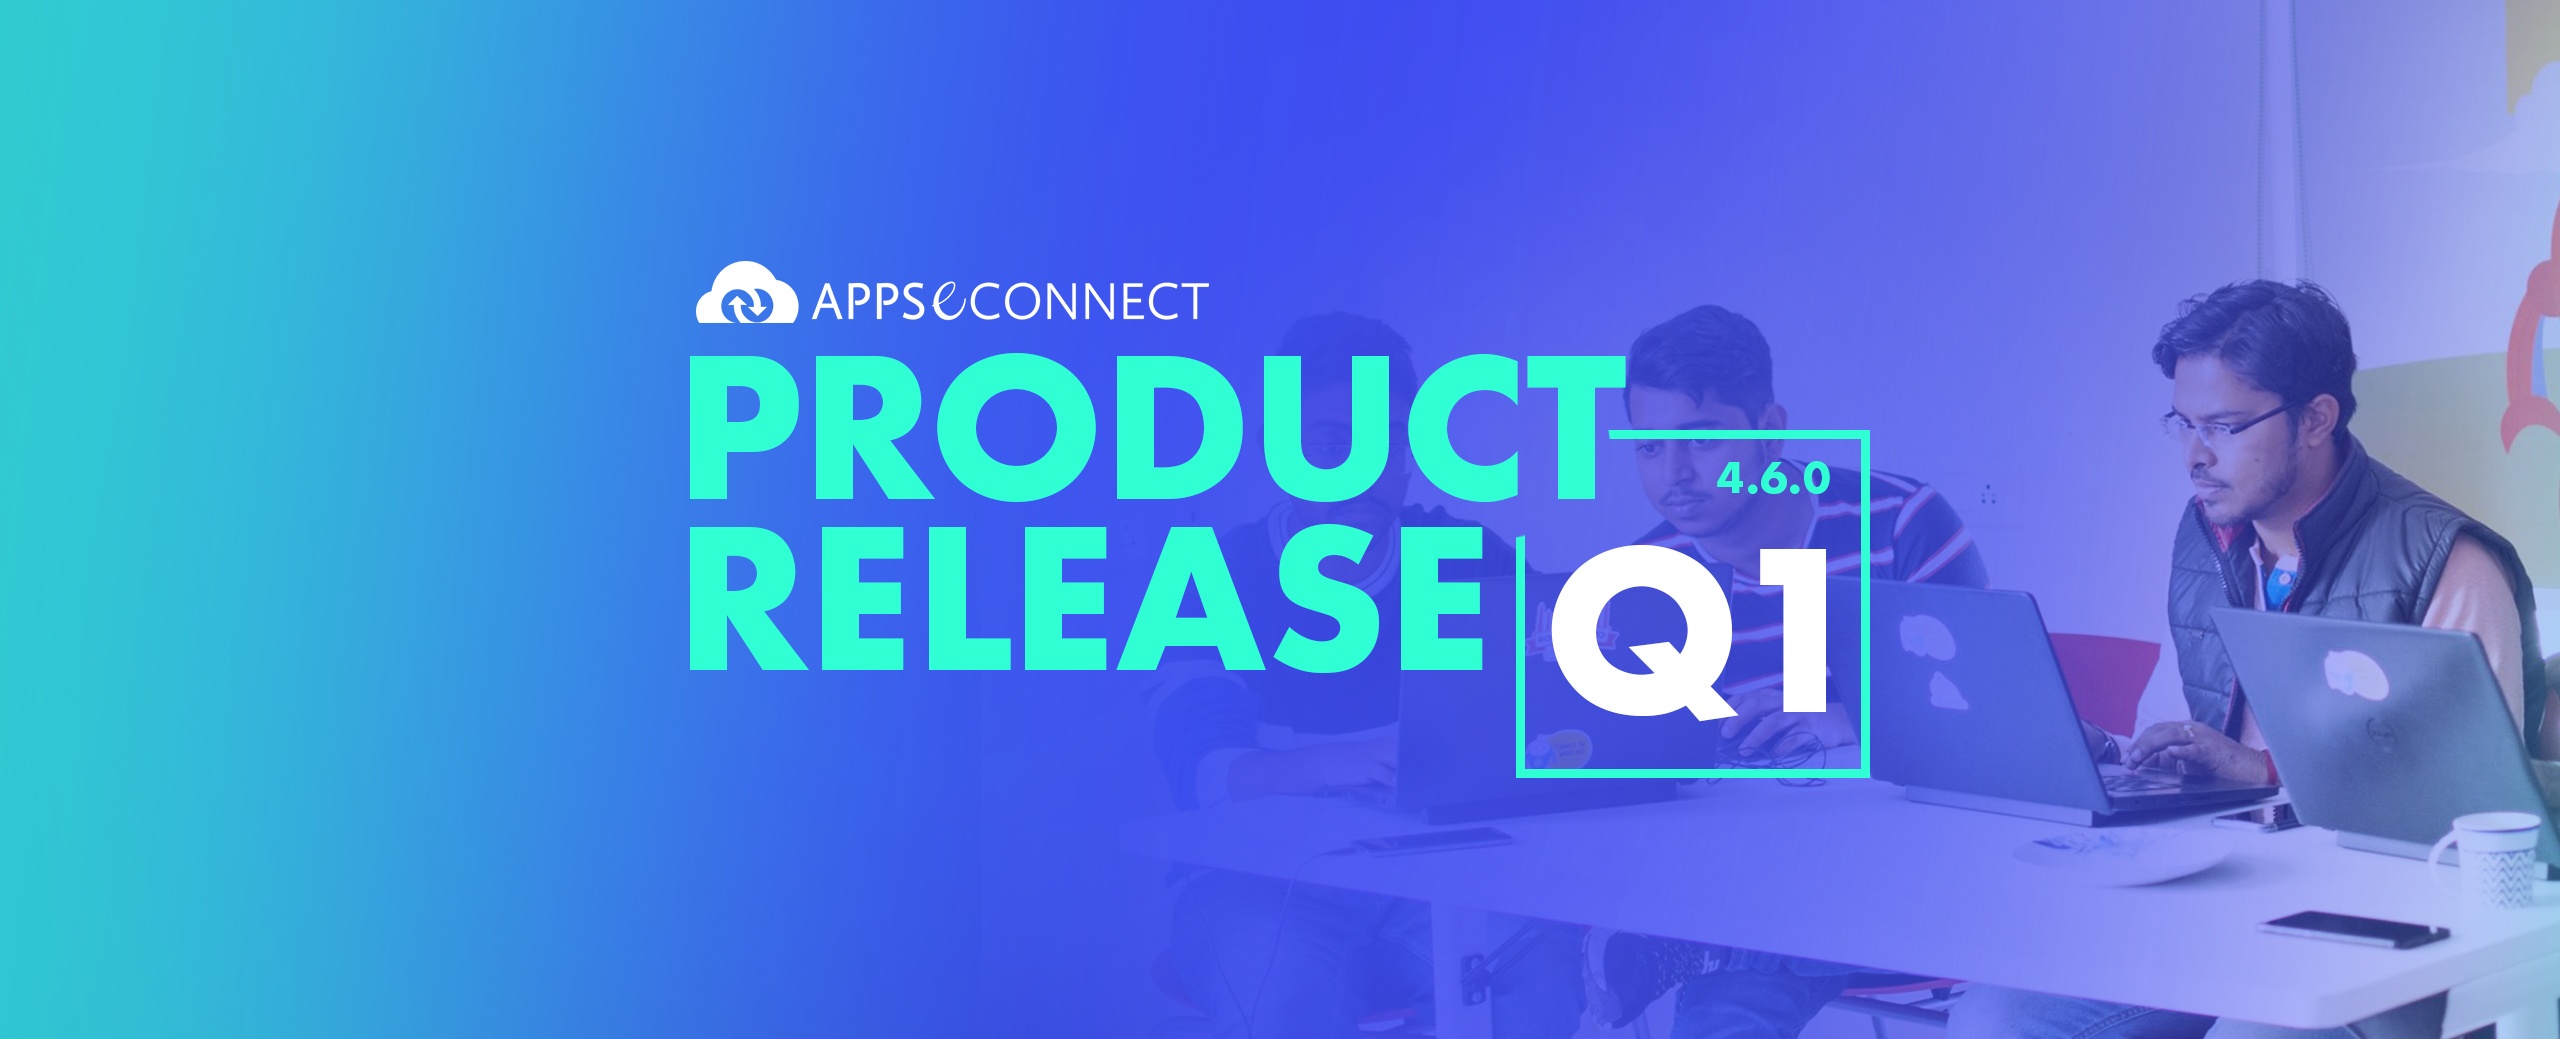 APPSeCONNECT Product Release Q1-4.6.0 copy